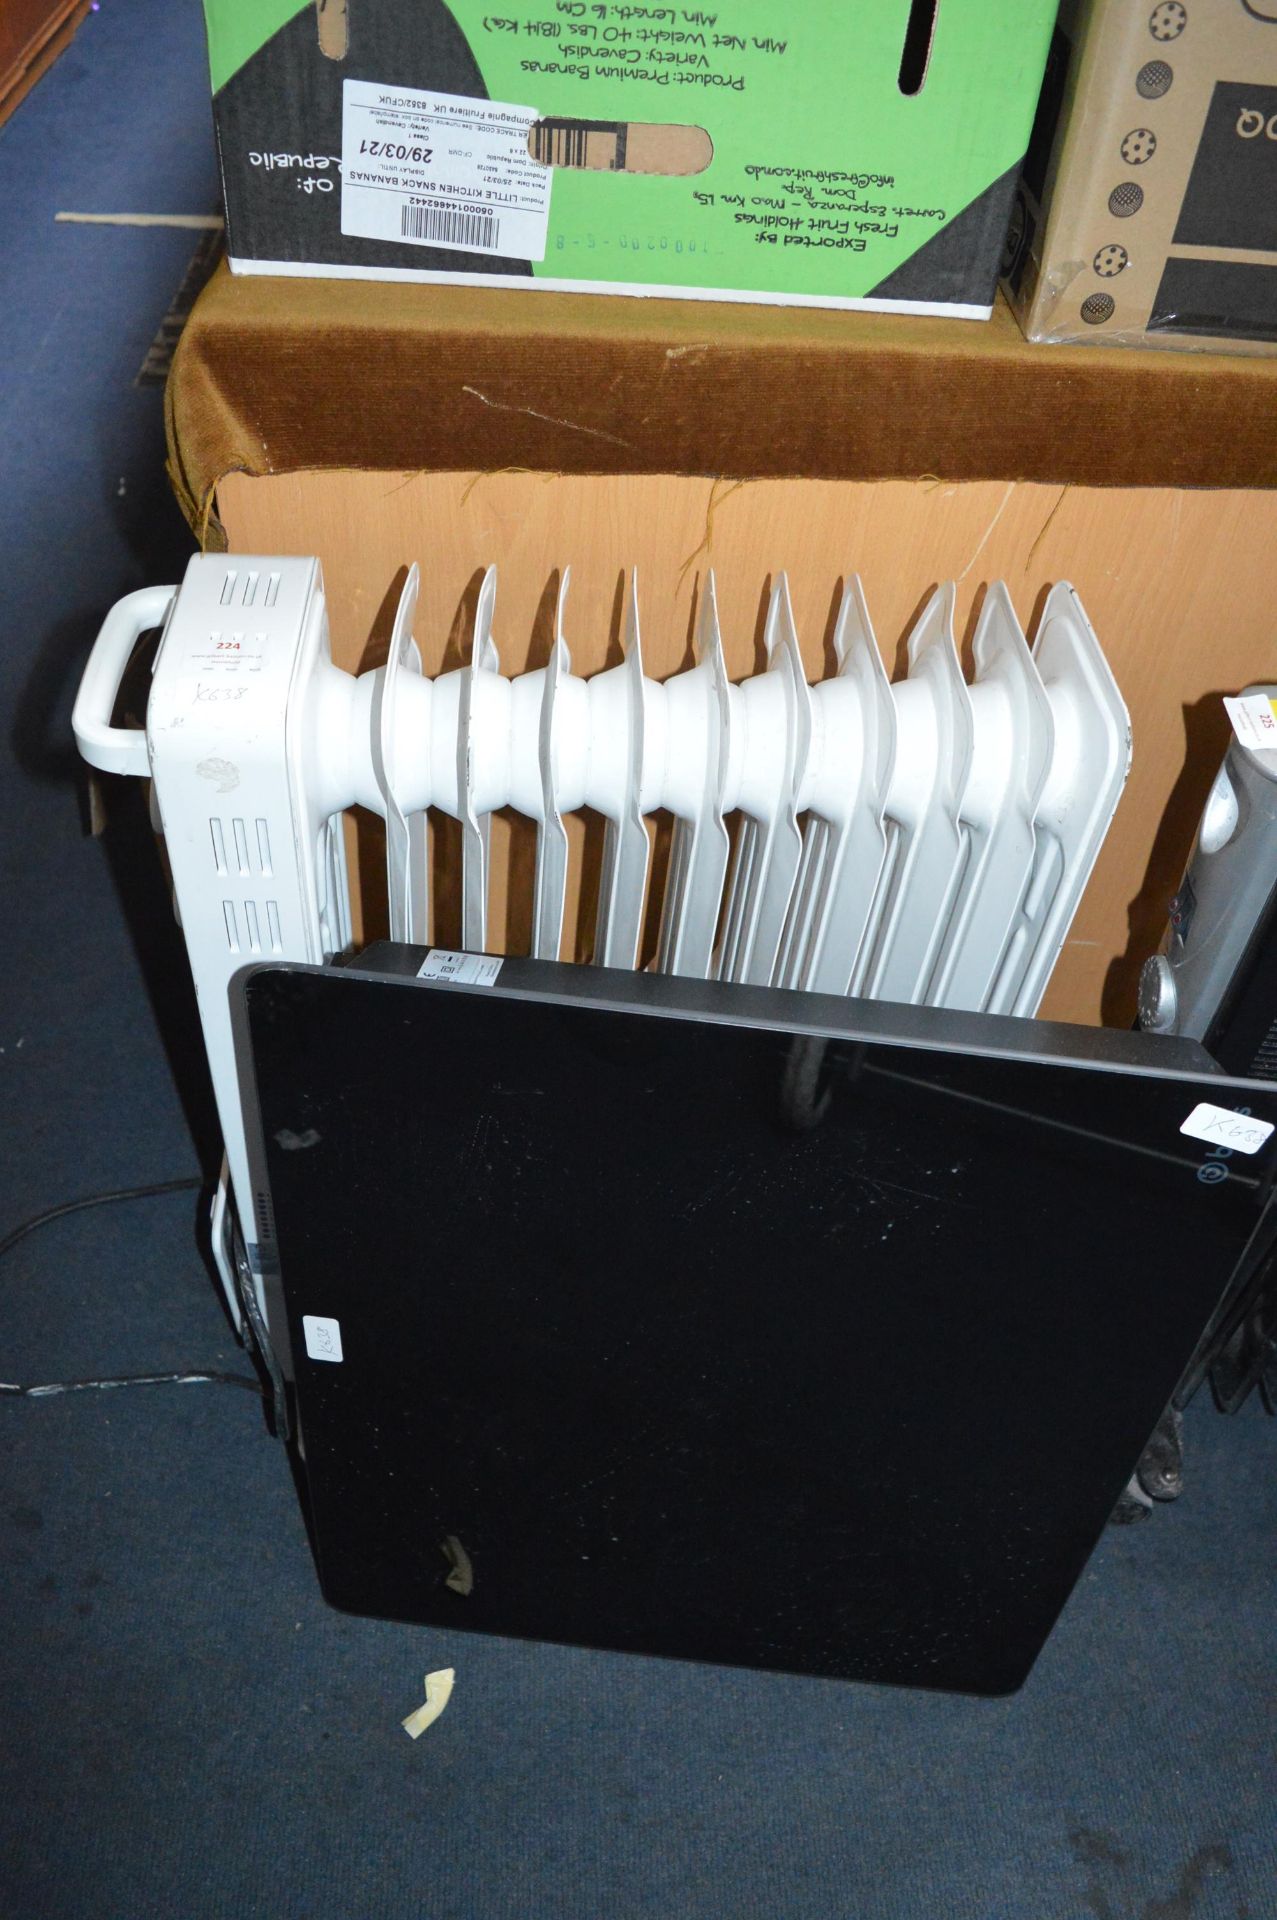 Oil Filled Radiator and a Wall Mounted Heater